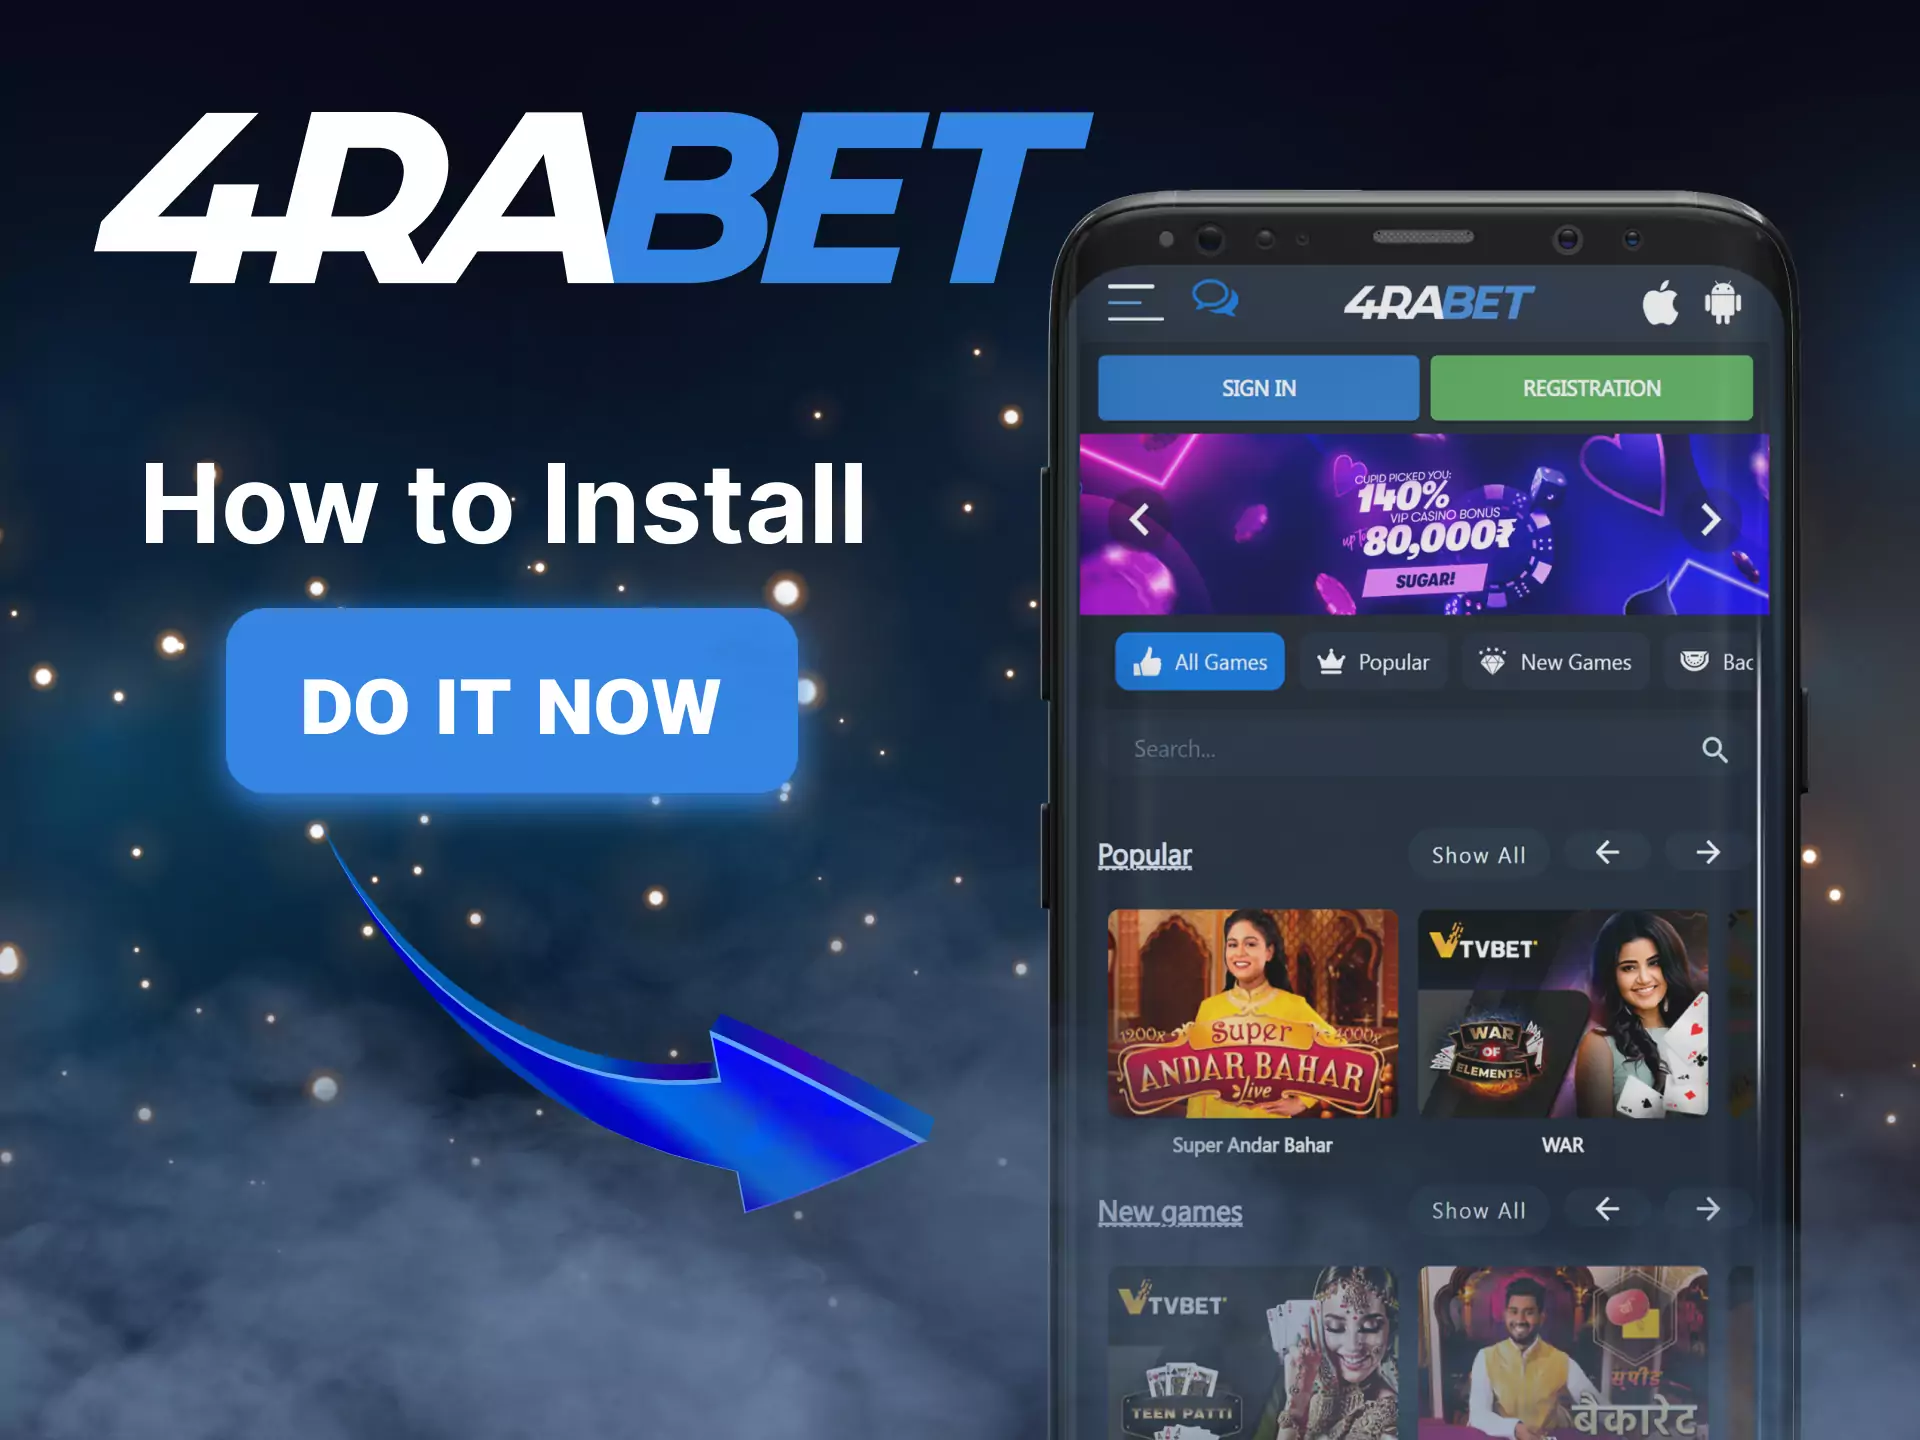 With this simple instruction, install the 4rabet mobile app on your device to bet.